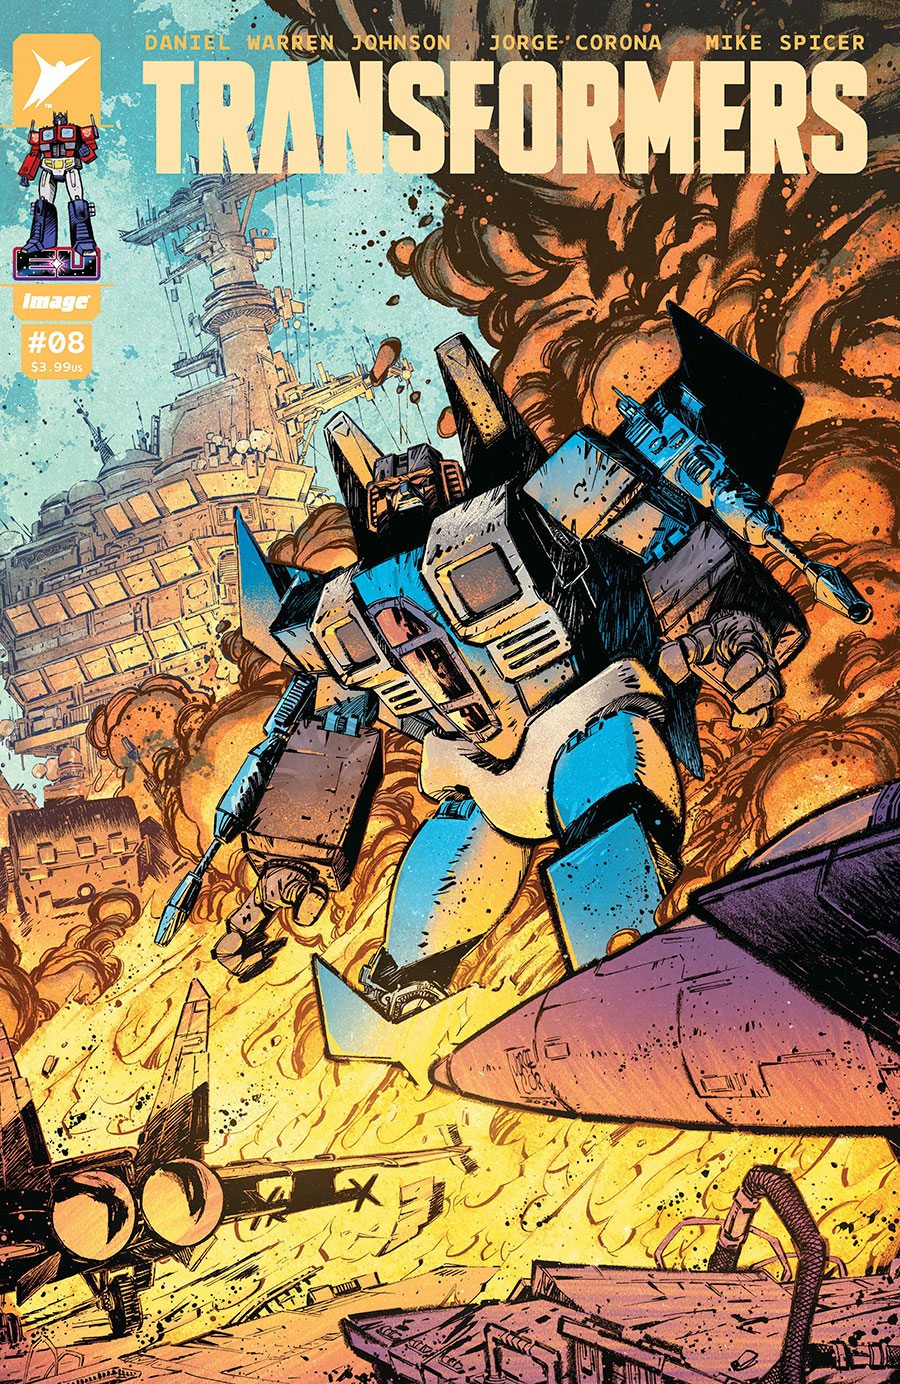 Transformers Vol 5 #8 Cover B Variant Jorge Corona & Mike Spicer Cover